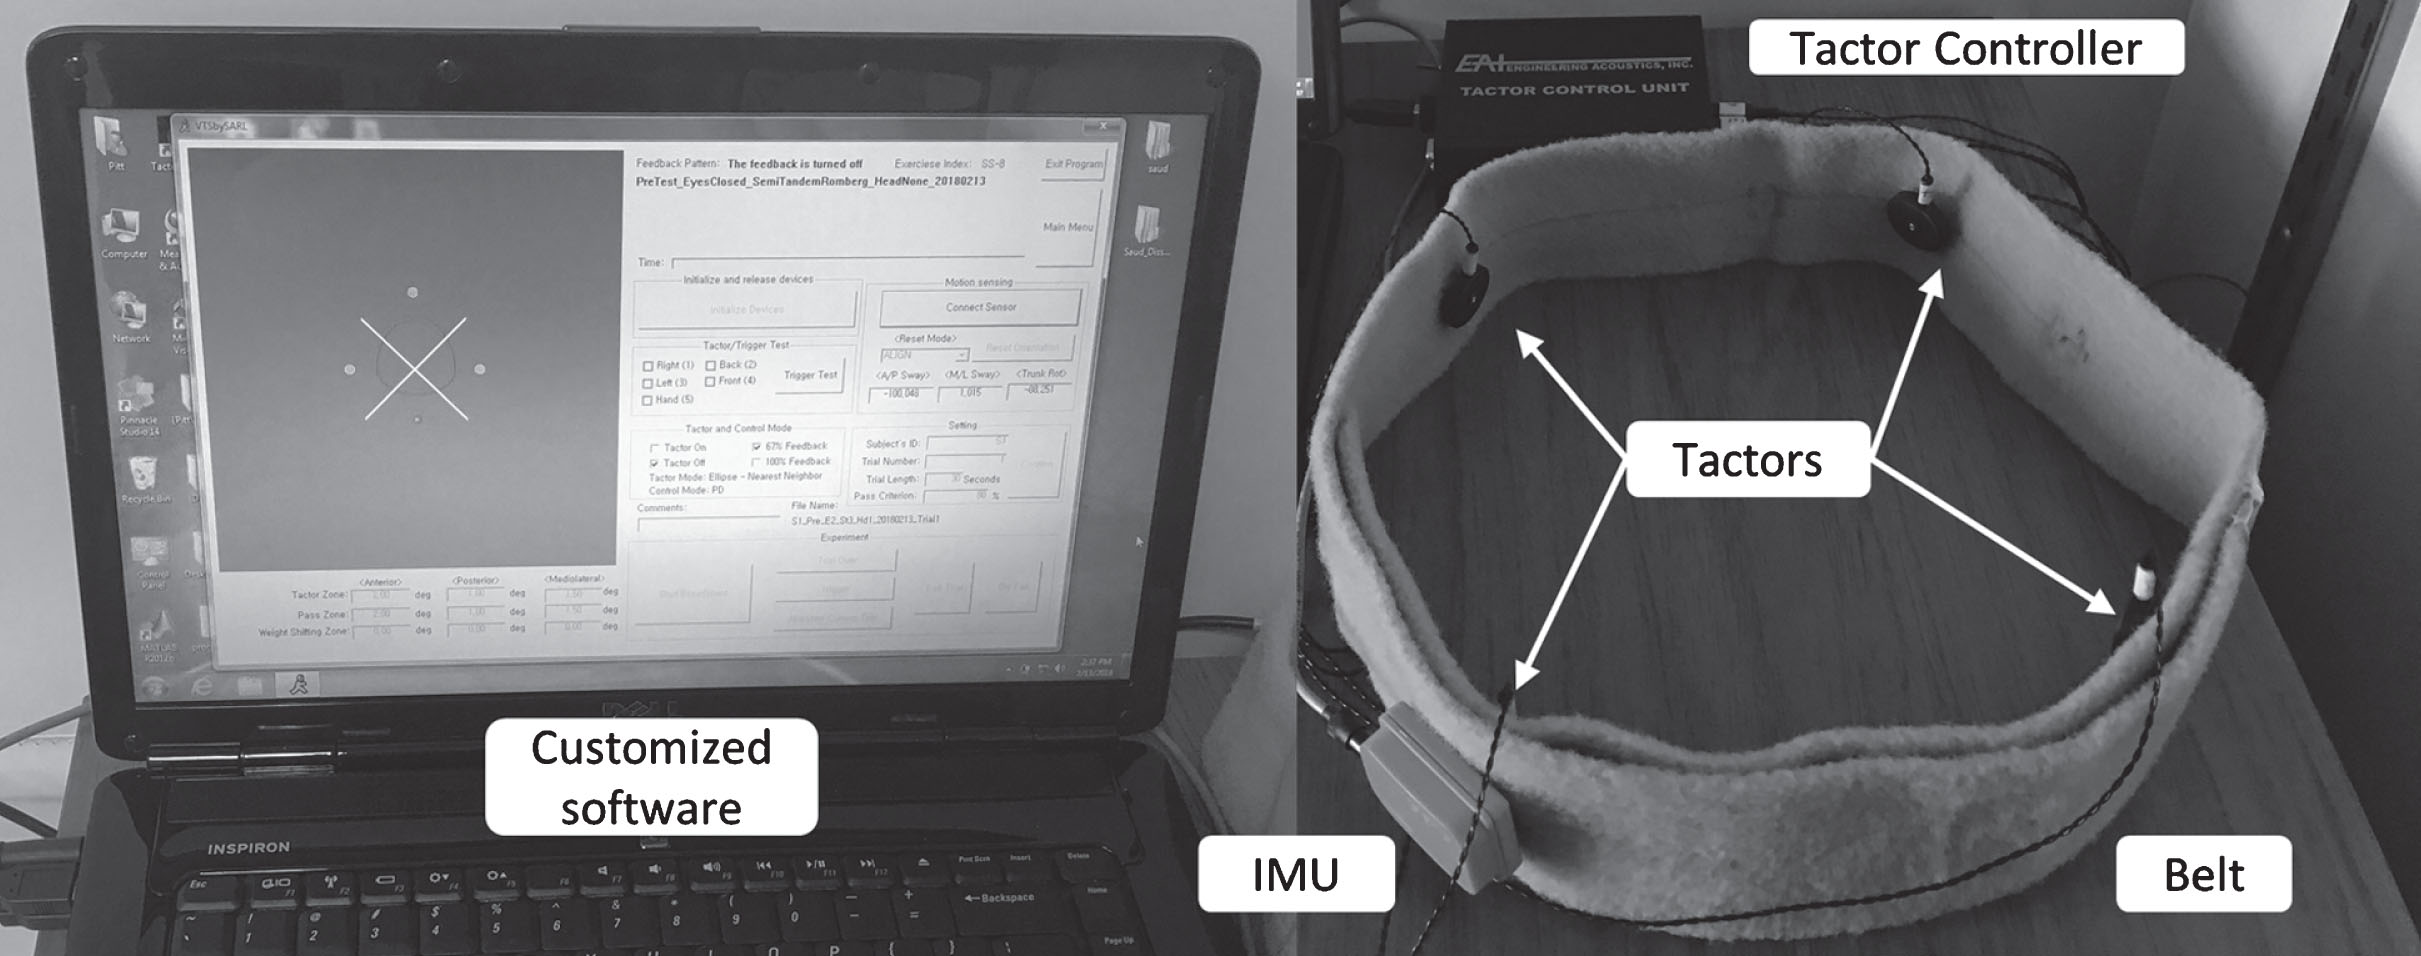 The customized sensory augmentation device included an IMU, four C-2 tactors, a tactor controller unit, a belt, a laptop, and customized software.